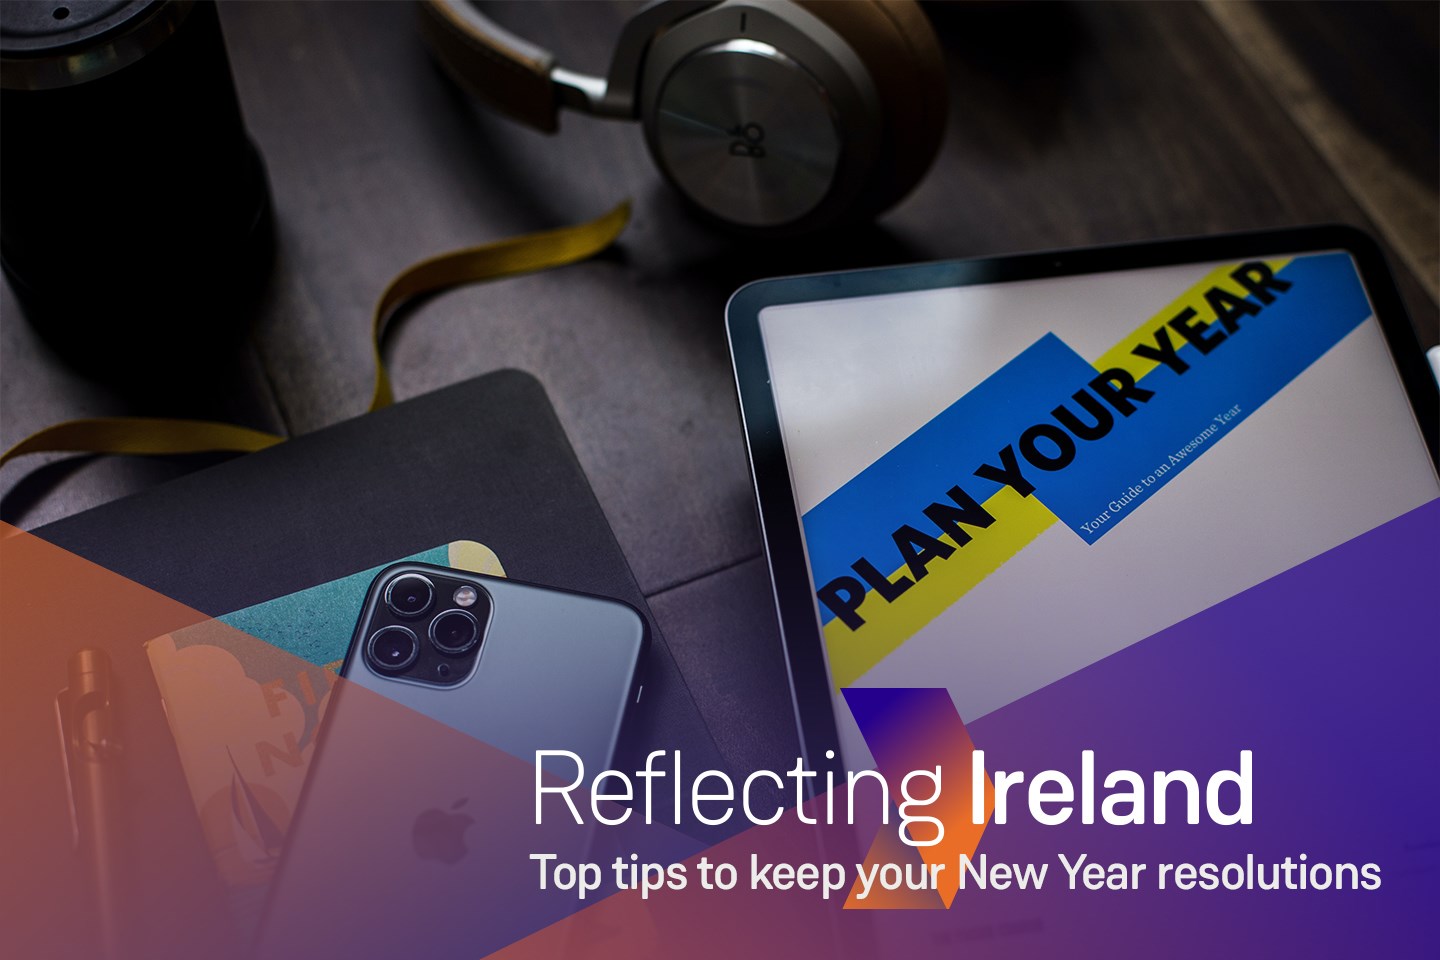 Close up on various media devices with a notepad and pen on a table, text on image 'Reflecting Ireland, Top tips to keep your New Year resolutions'